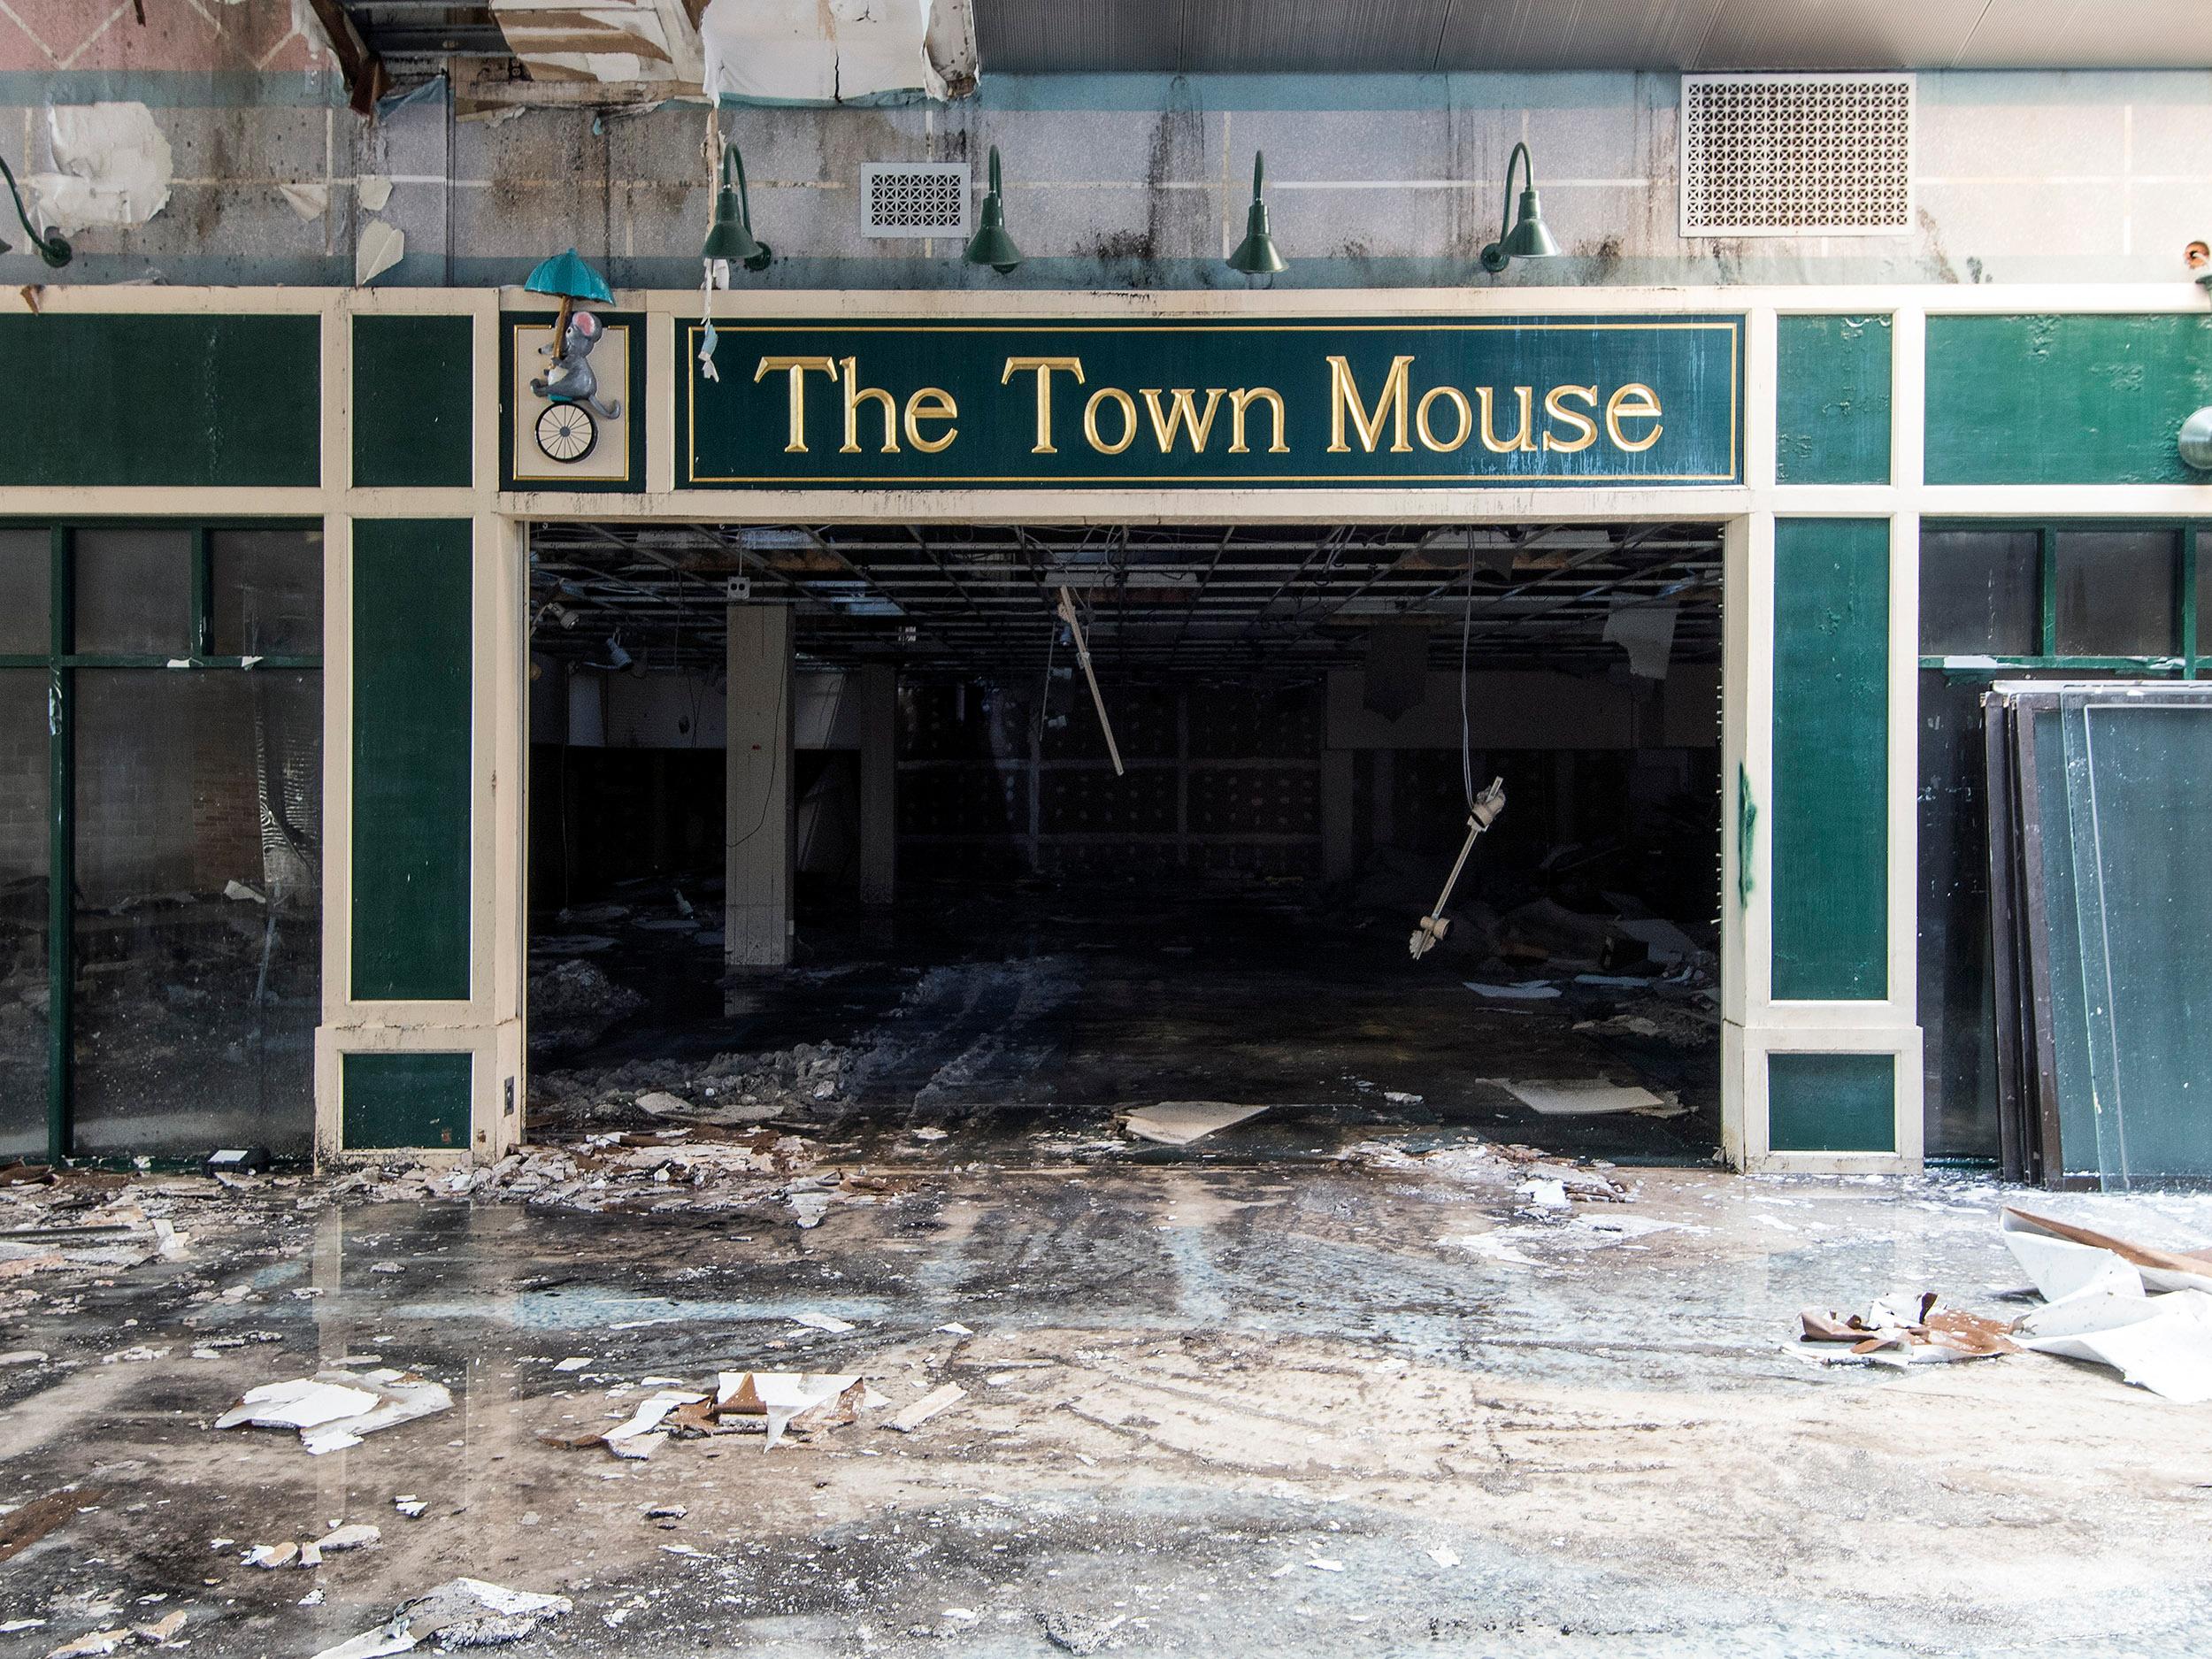 Phillip Buehler Color Photograph - "The Town Mouse" Wayne Hills Mall, New Jersey (Modern Ruins) color photograph